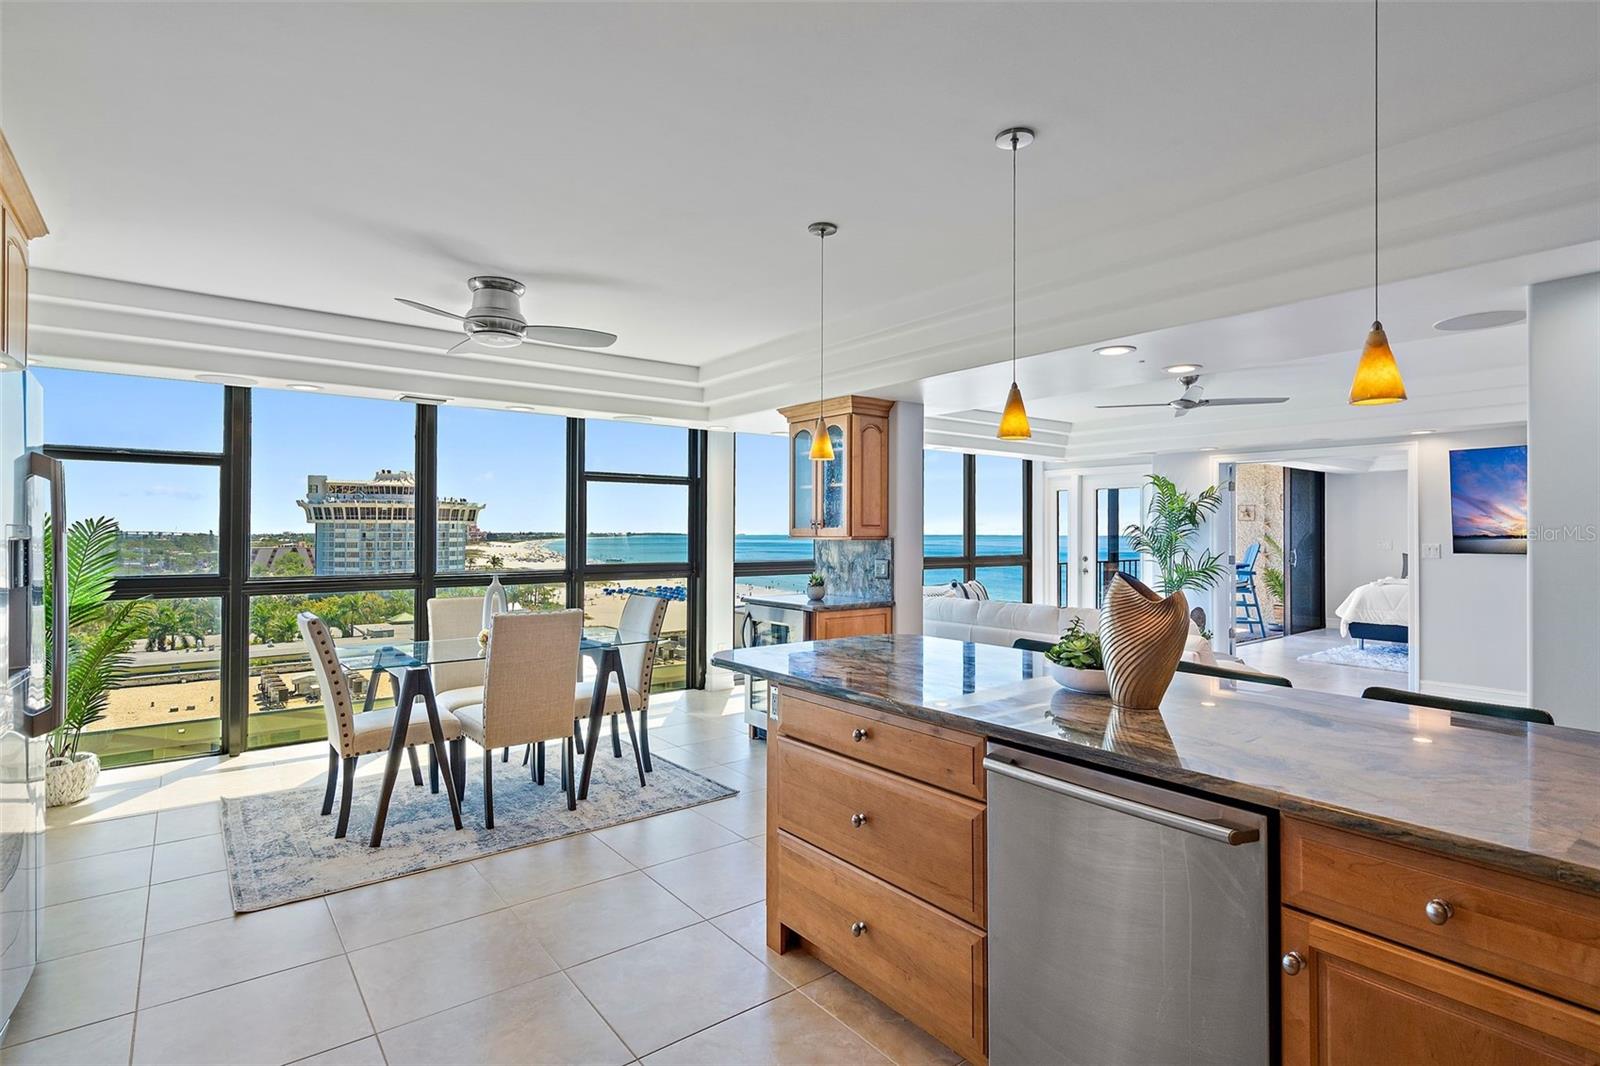 The view is the #1 focal point. But, the kitchen is also a stunner!